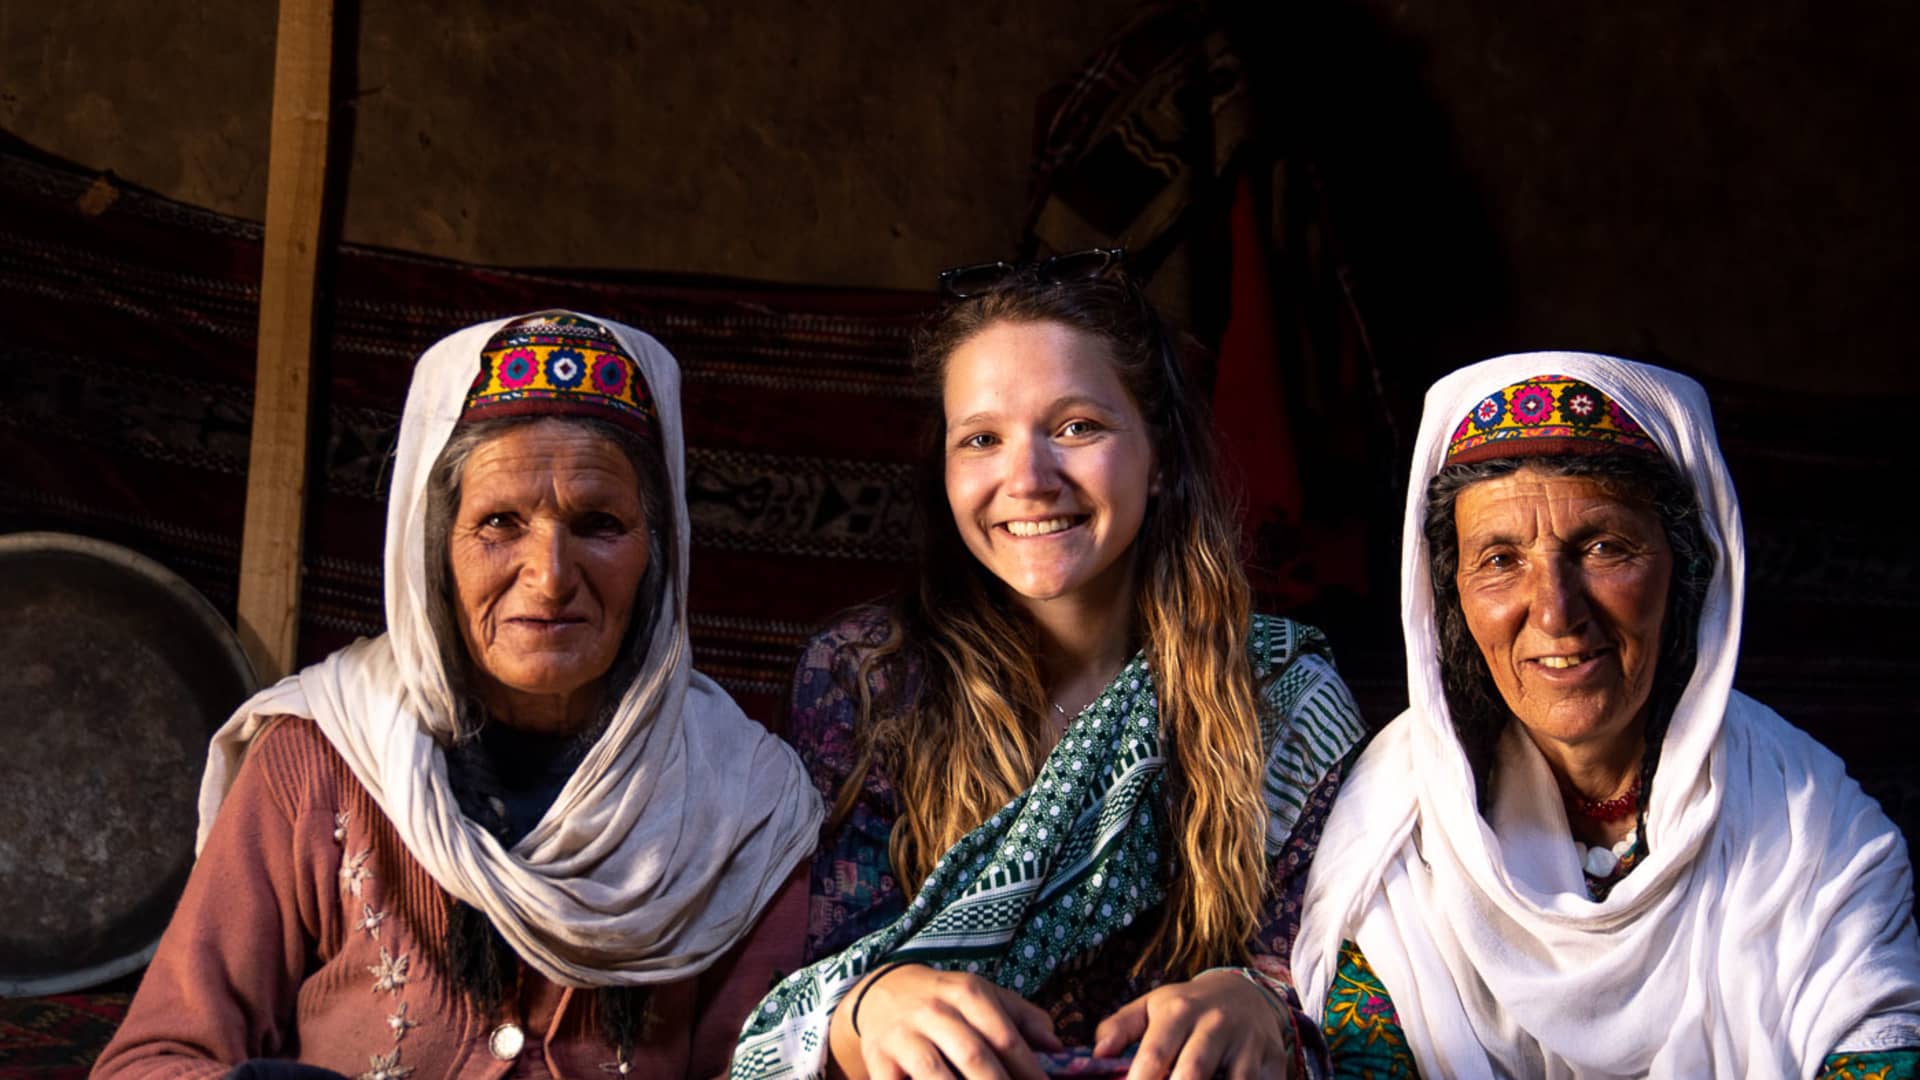 Myself and two strong older women from Chapursan Valley, which is one of the most remote parts of Hunza situated alongside the Wakhan Corridor